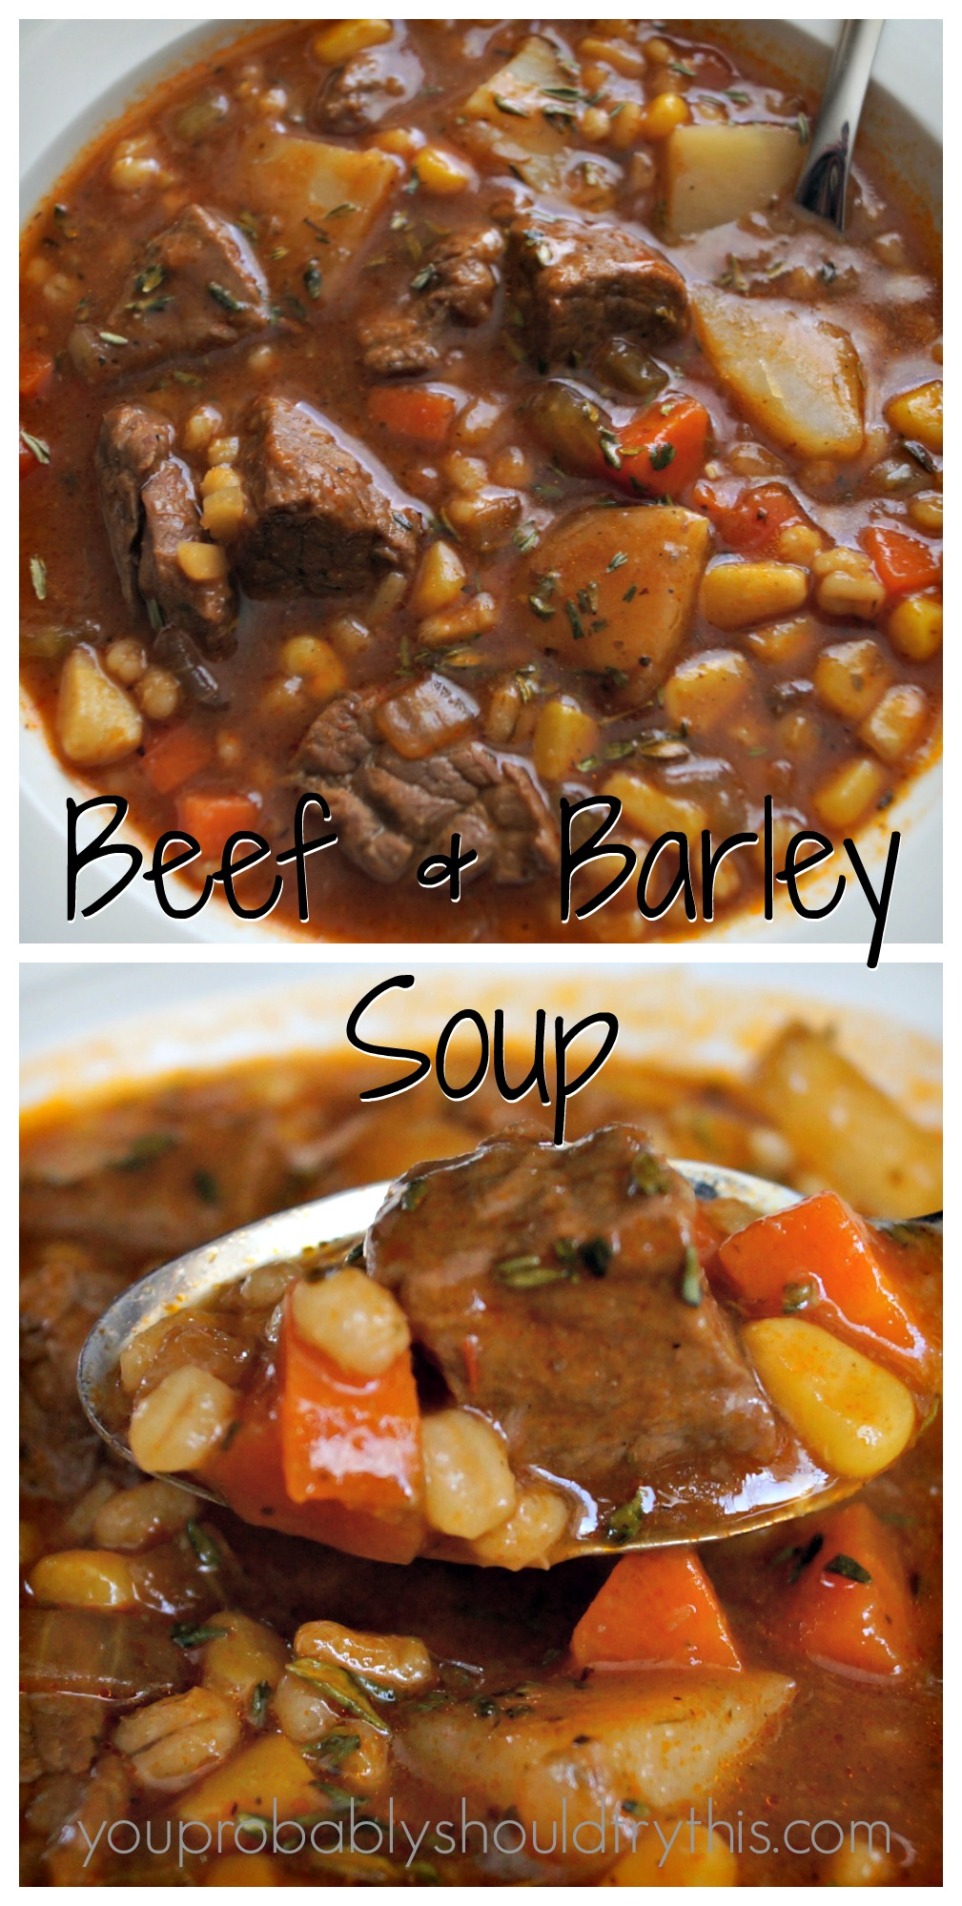 Hearty Beef &amp; Barley Soup – you probably should try this